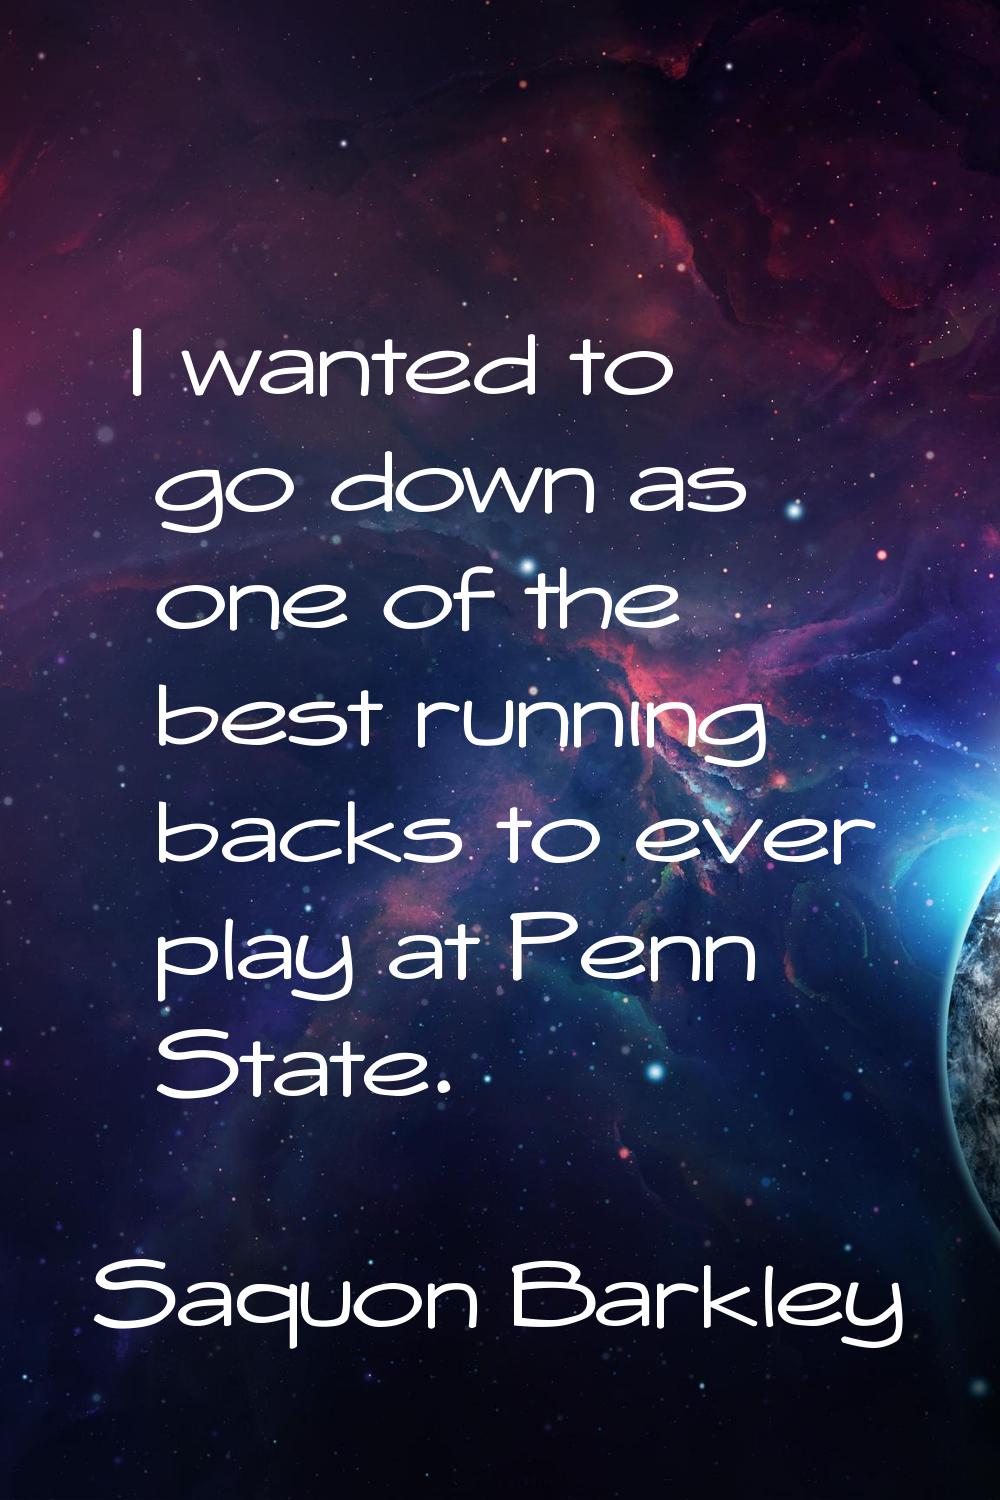 I wanted to go down as one of the best running backs to ever play at Penn State.